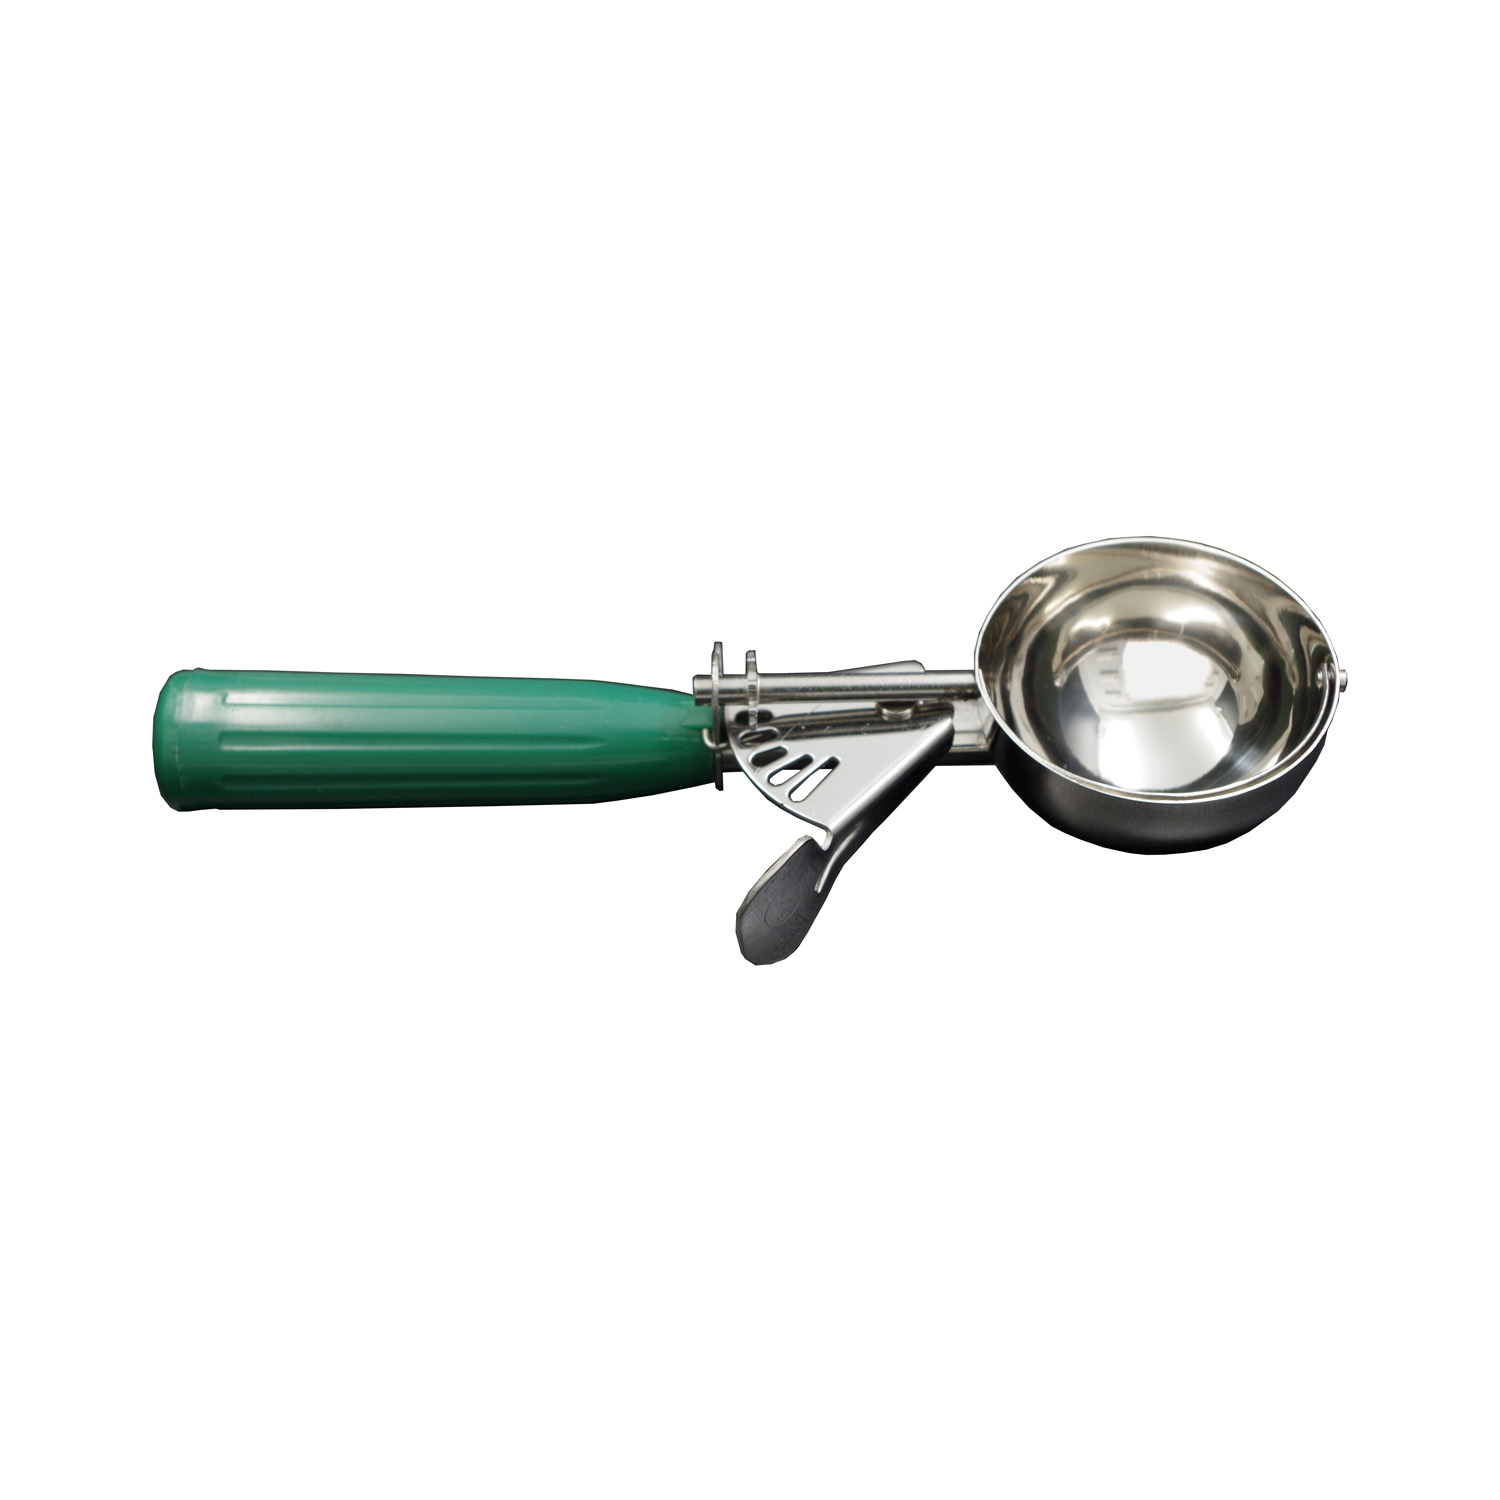 CAC China SICD-12GN Stainless Steel Thumb Disher with Green Handle 2.66 oz., #12